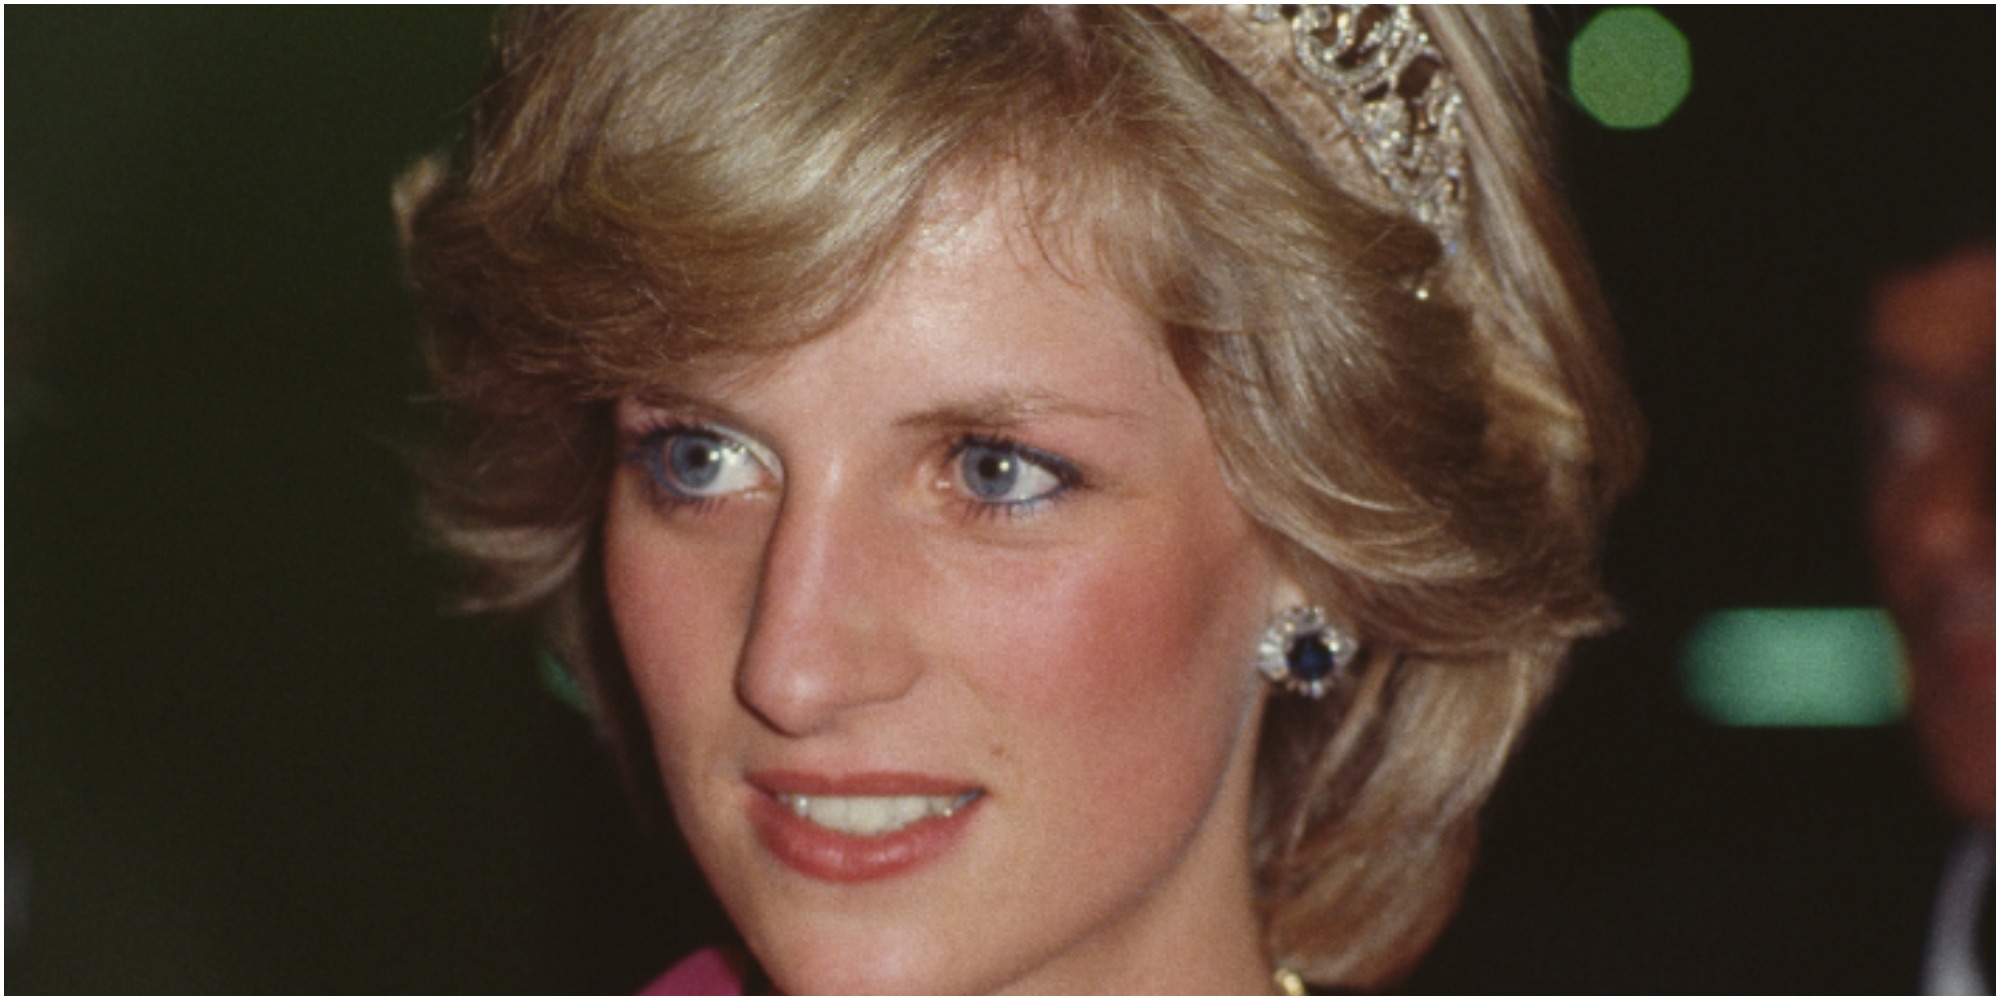 Princess Diana wears a blush colored gown and a crown.